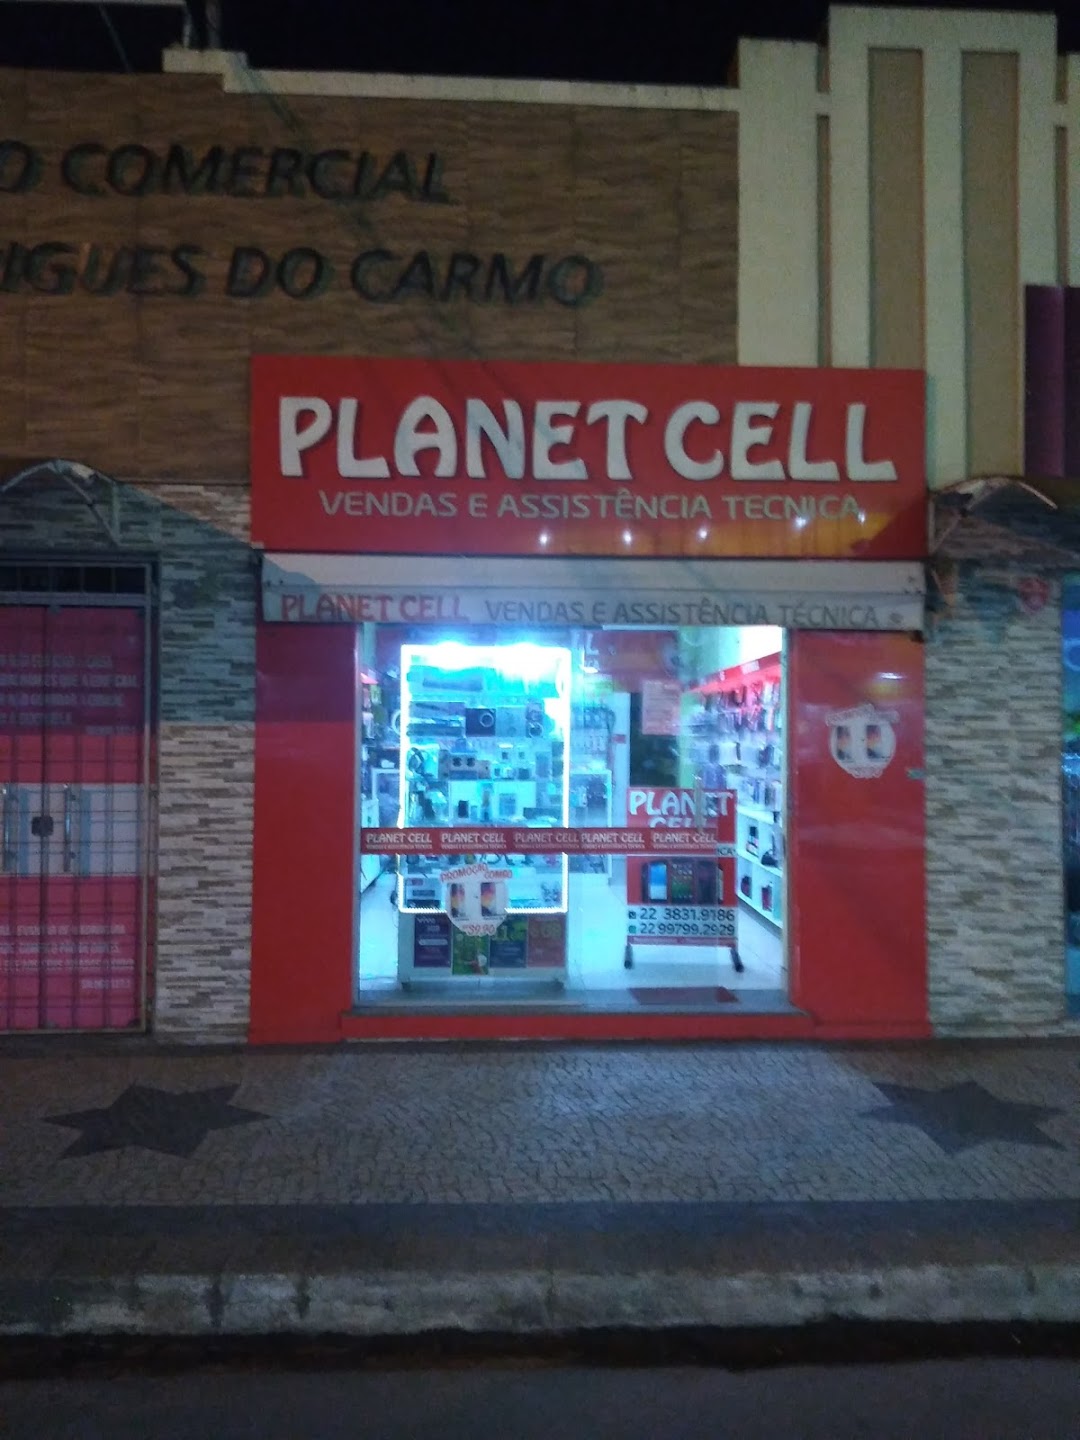 Planet cell